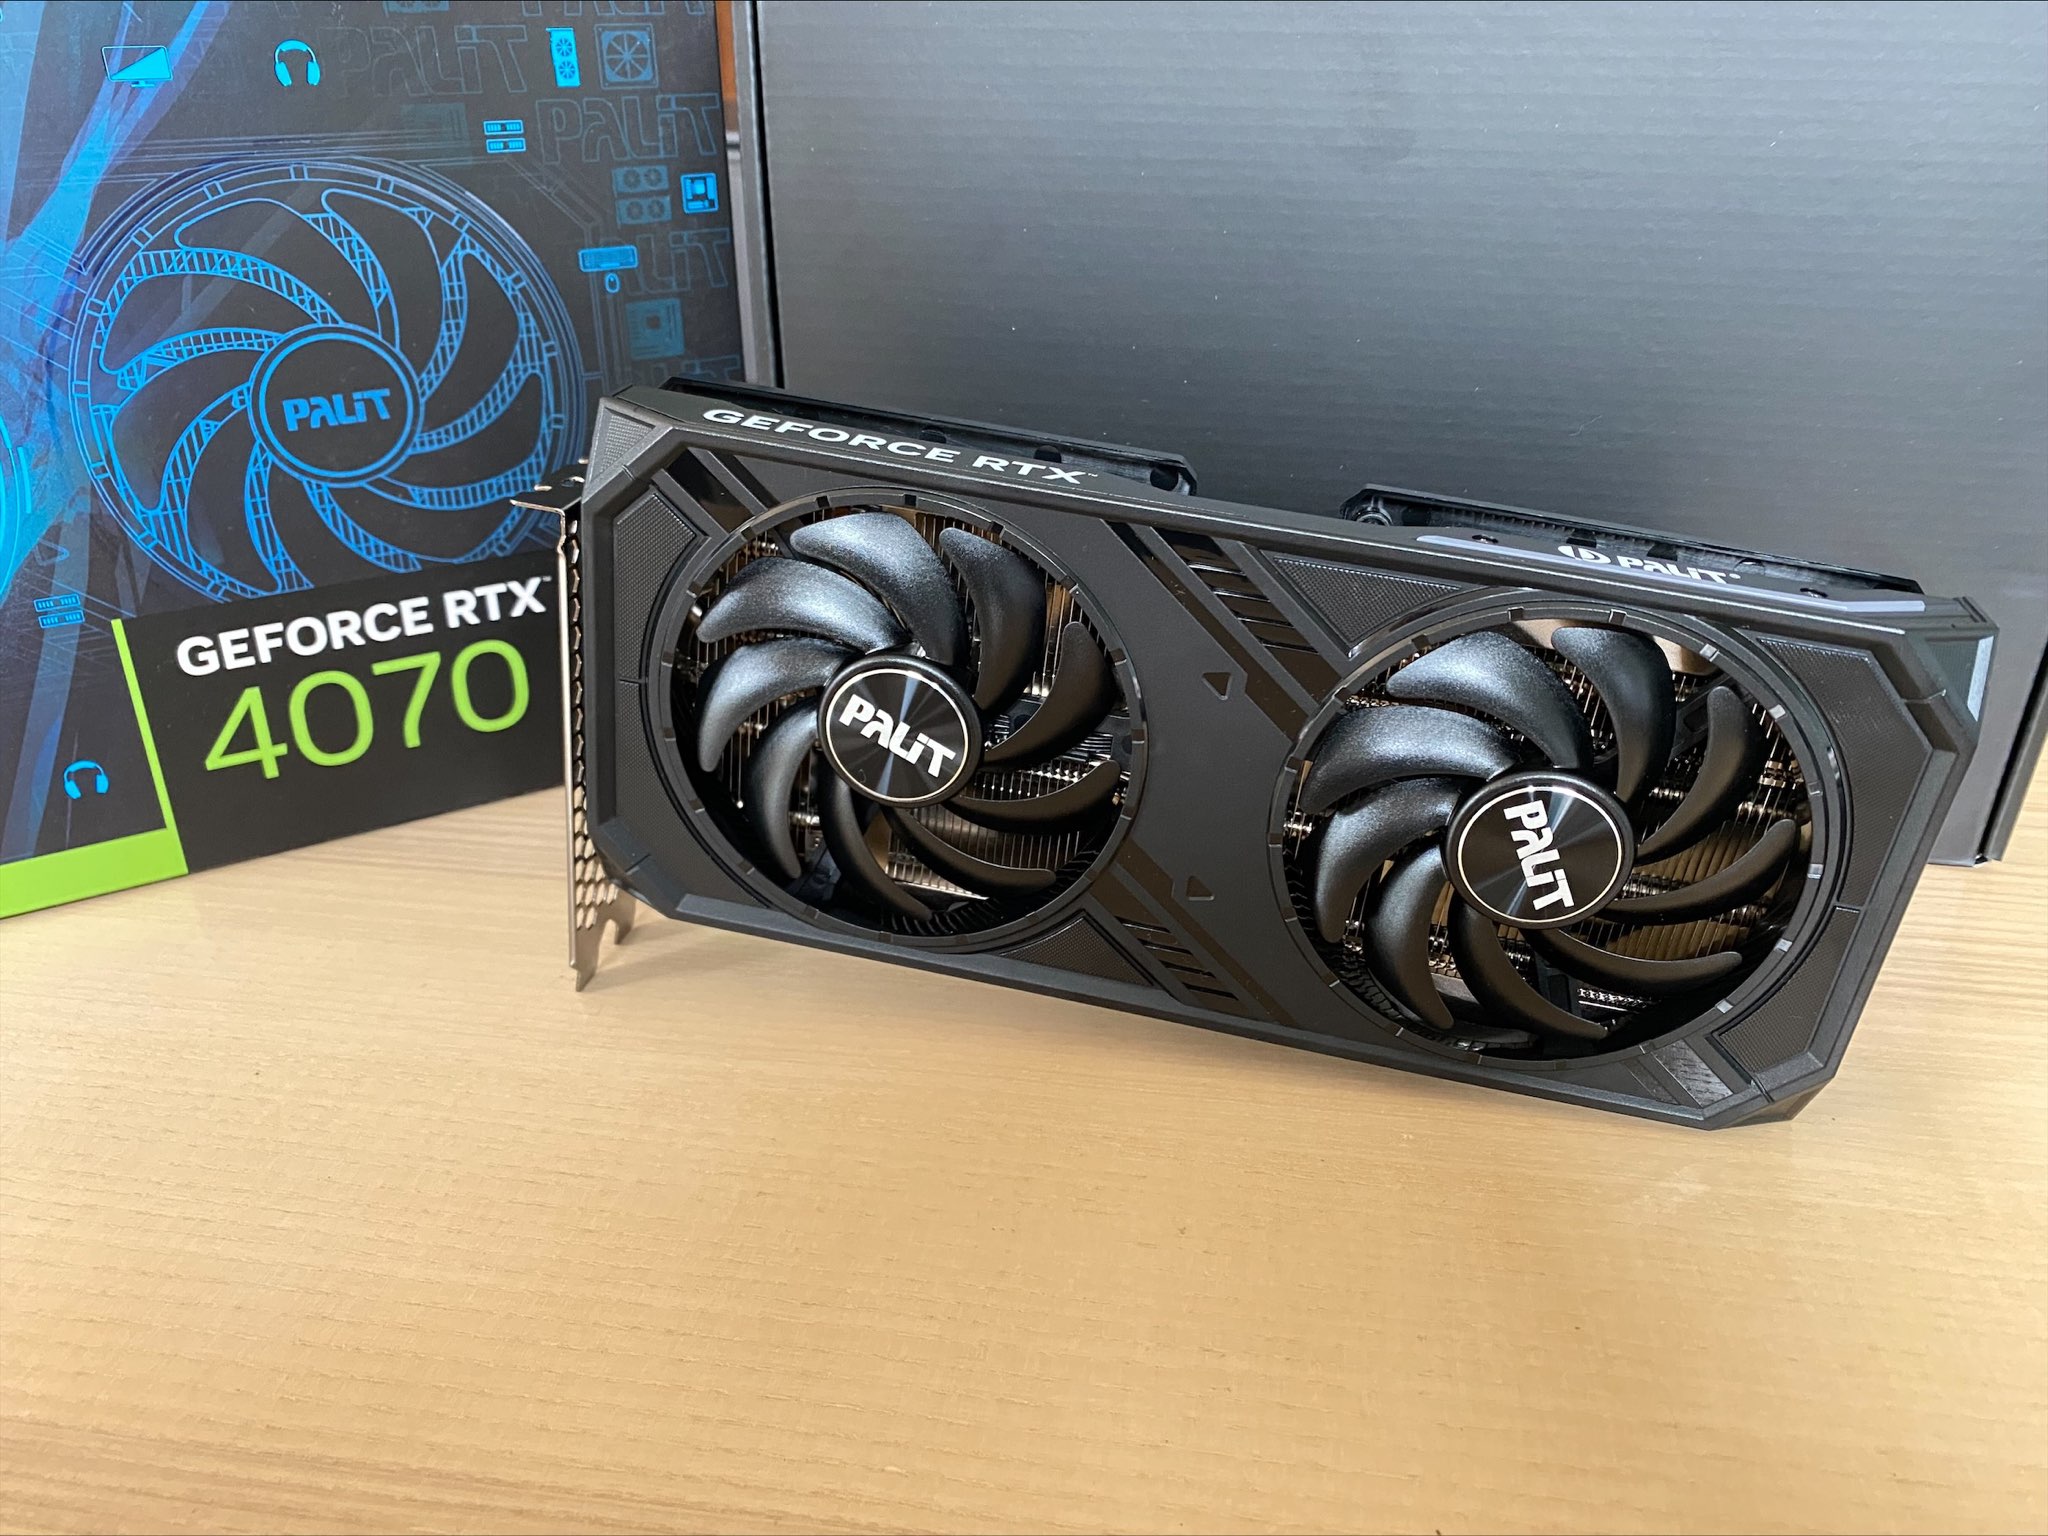 Palit RTX 4070 Dual 12GB Undboxing and Hands On - Short and sleek